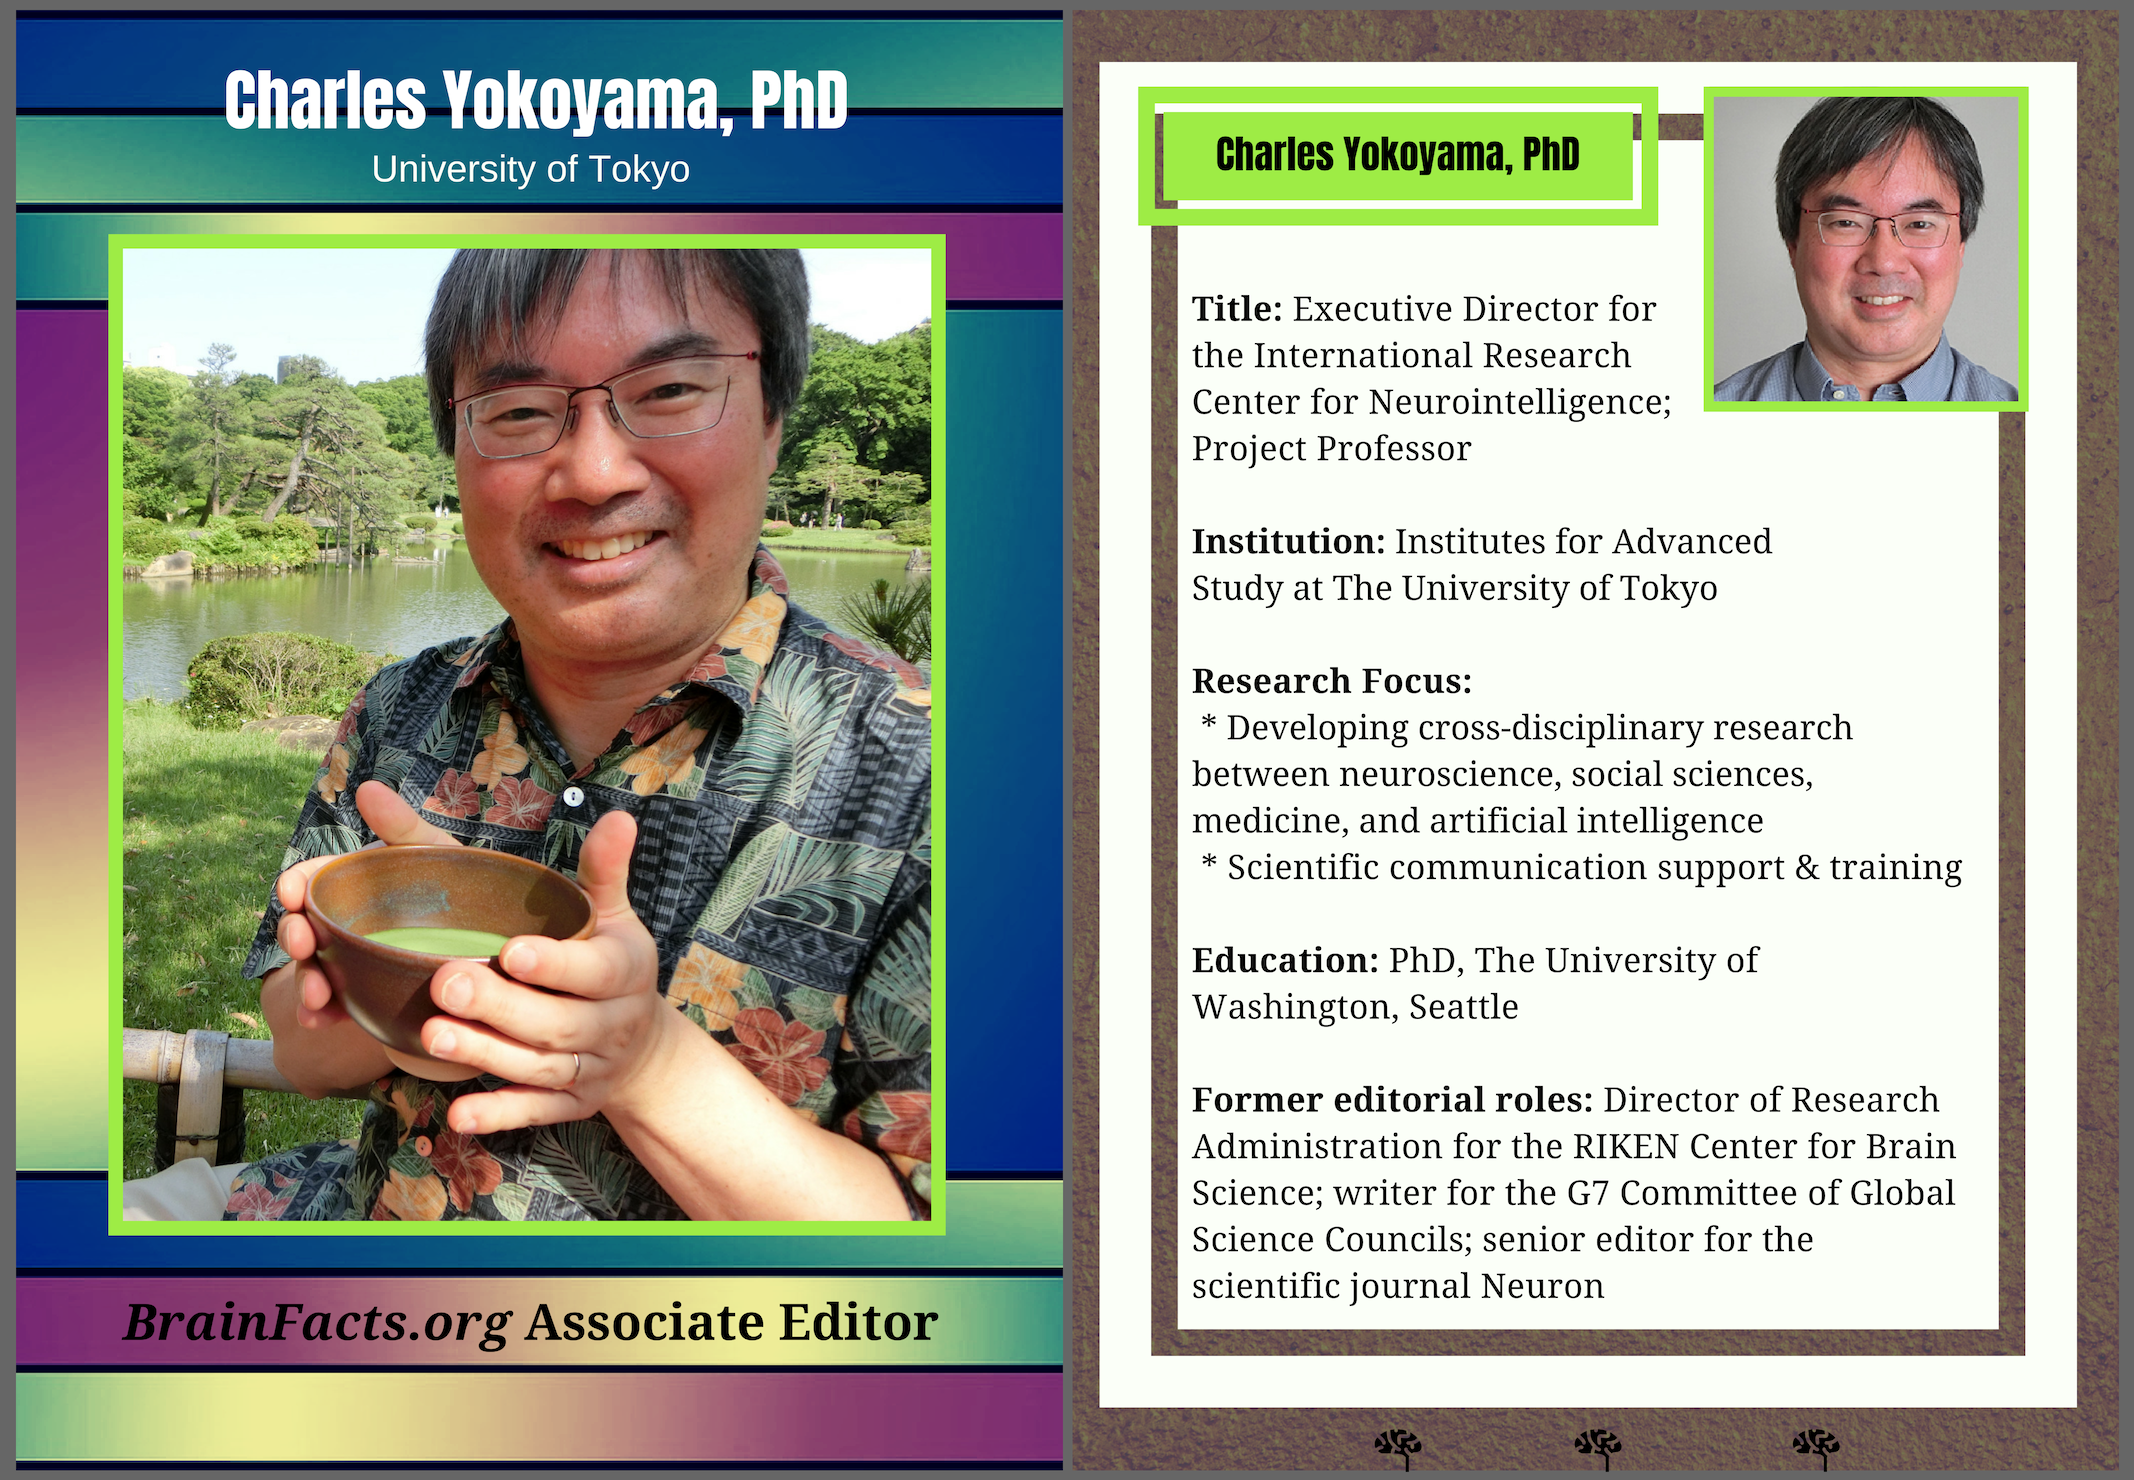 Photograph of Charles Yokoyama with facts to the right of it